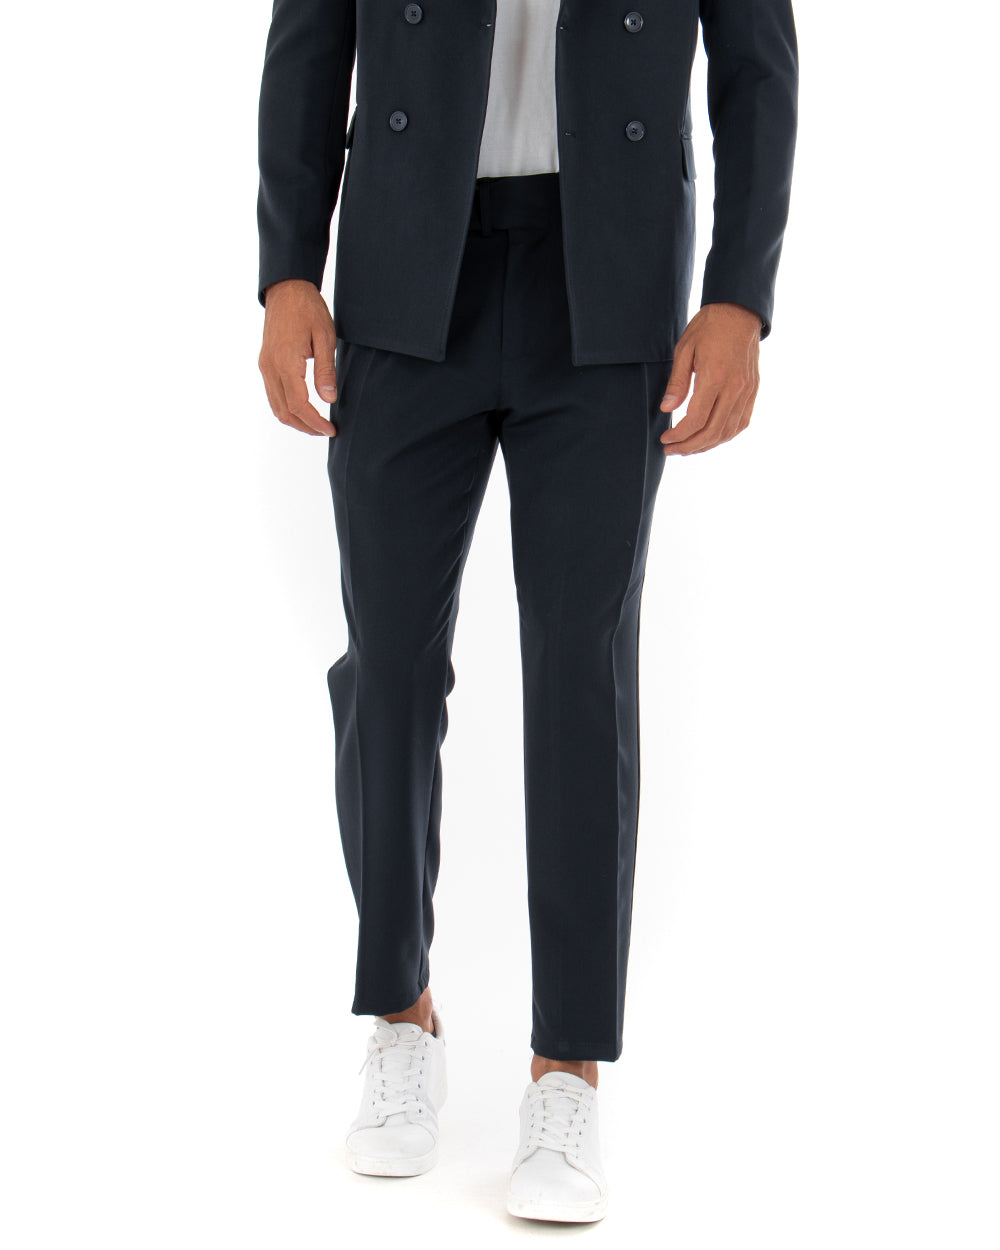 Double-Breasted Men's Suit Blue Viscose Tailored Jacket Trousers Elegant Casual GIOSAL-OU2084A